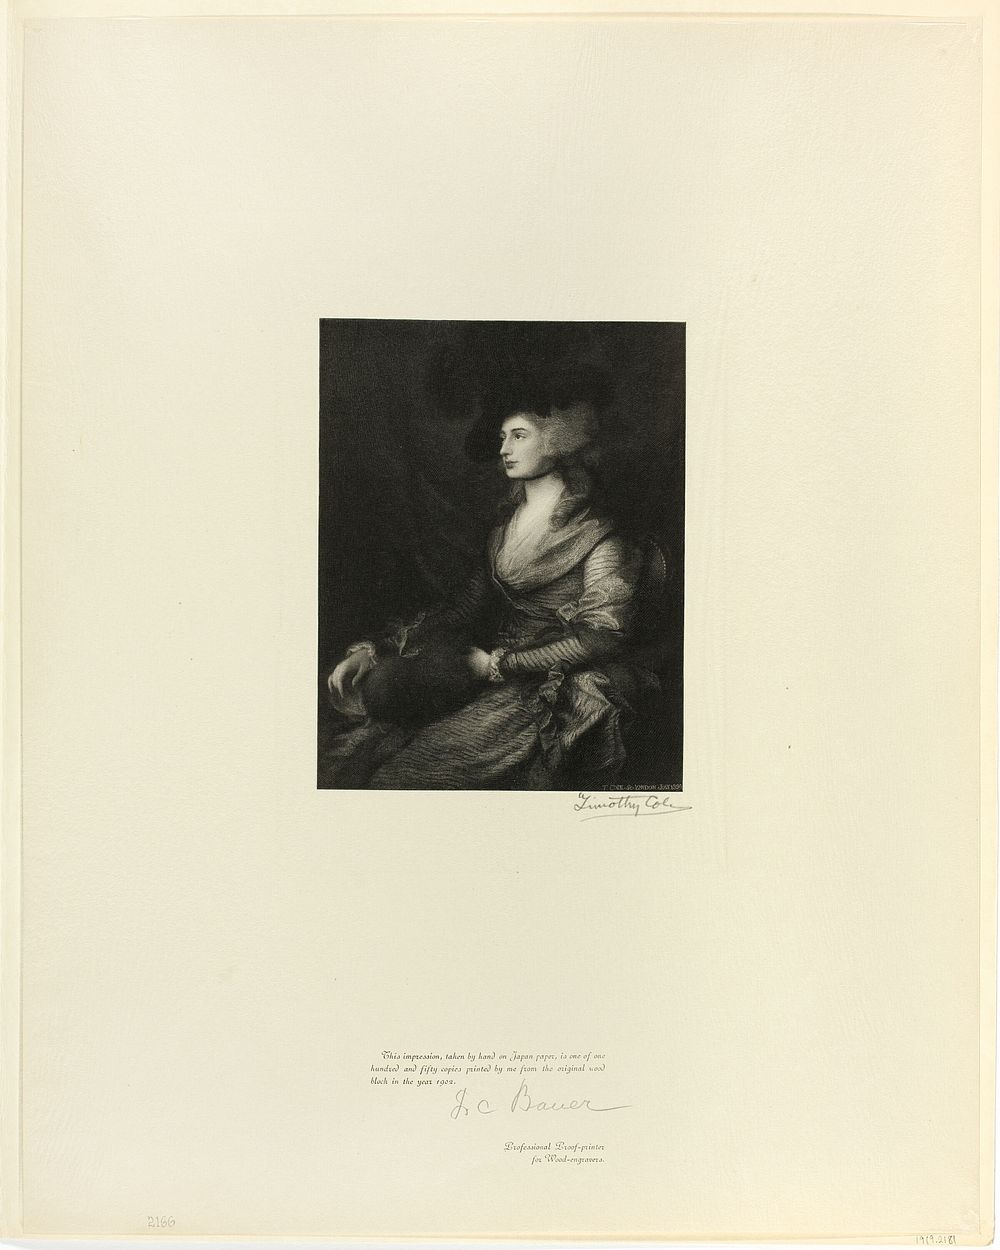 Portrait of Mrs. Siddons, from Old English Masters by Timothy Cole